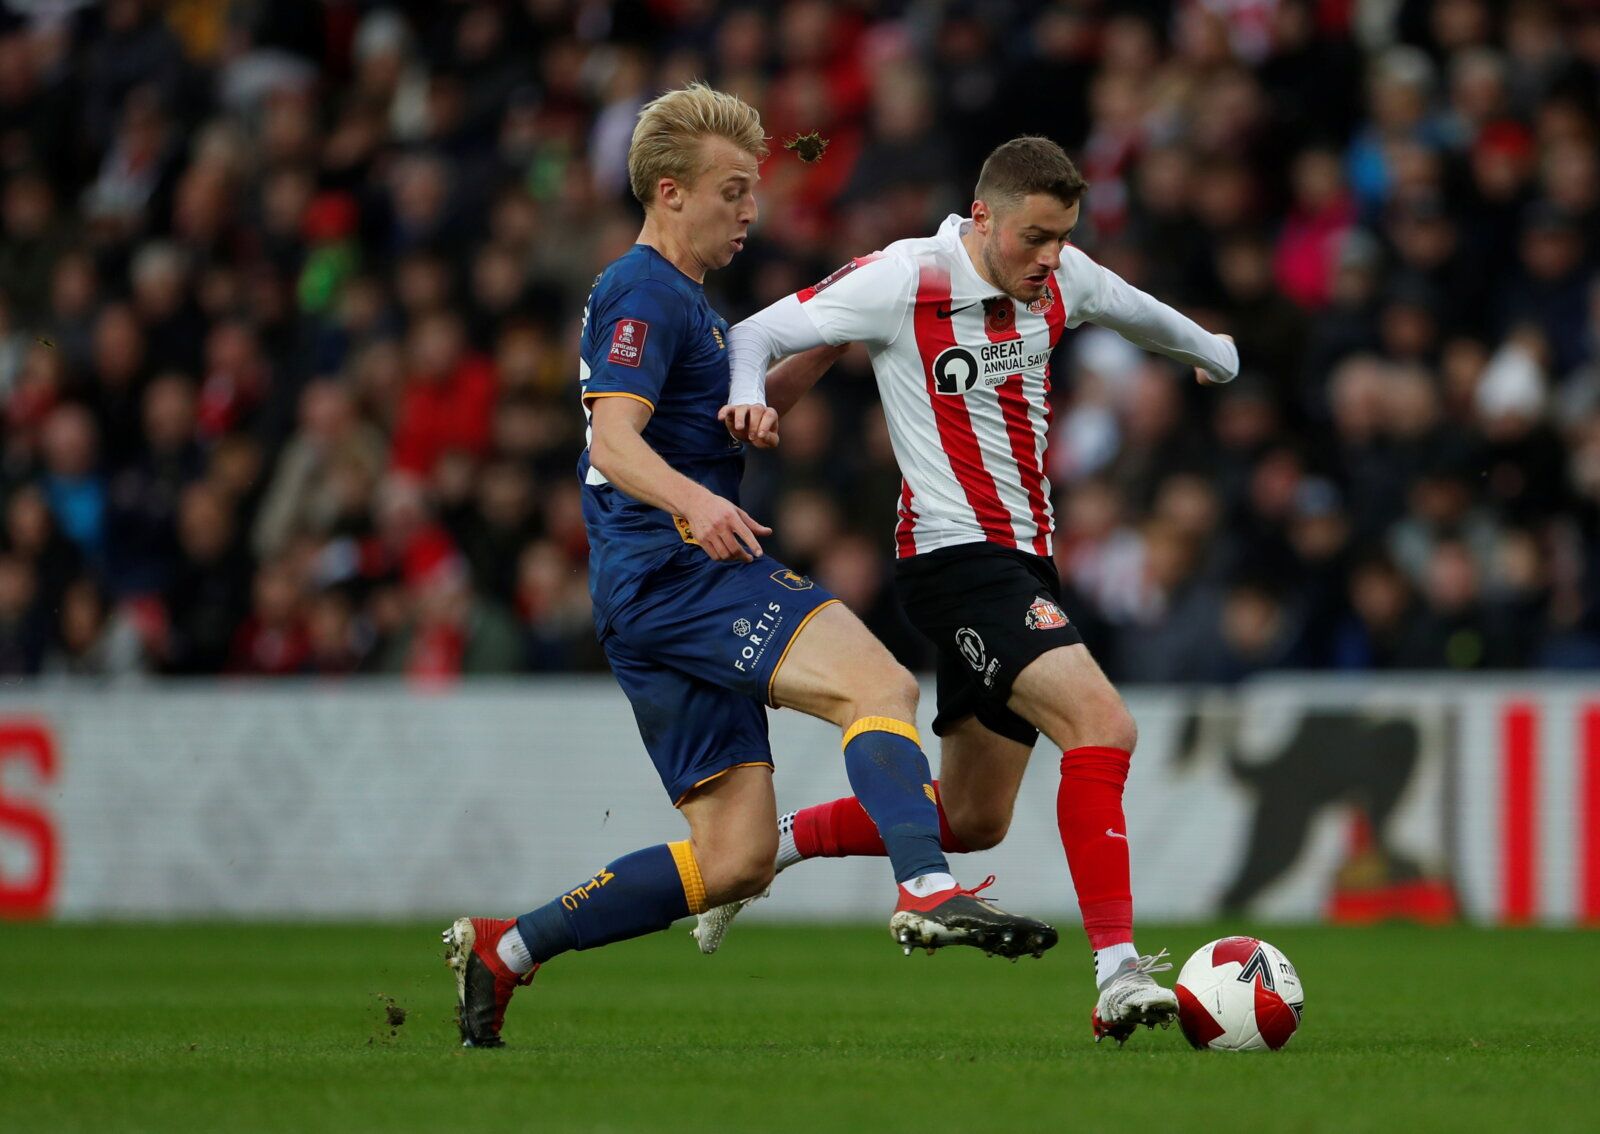 Soccer Football - FA Cup - First Round - Sunderland v Mansfield Town - Stadium of Light, Sunderland, Britain - November 6, 2021 Mansfield Town's Harry Charley in action with Sunderland’s Elliot Embleton  Action Images/Lee Smith